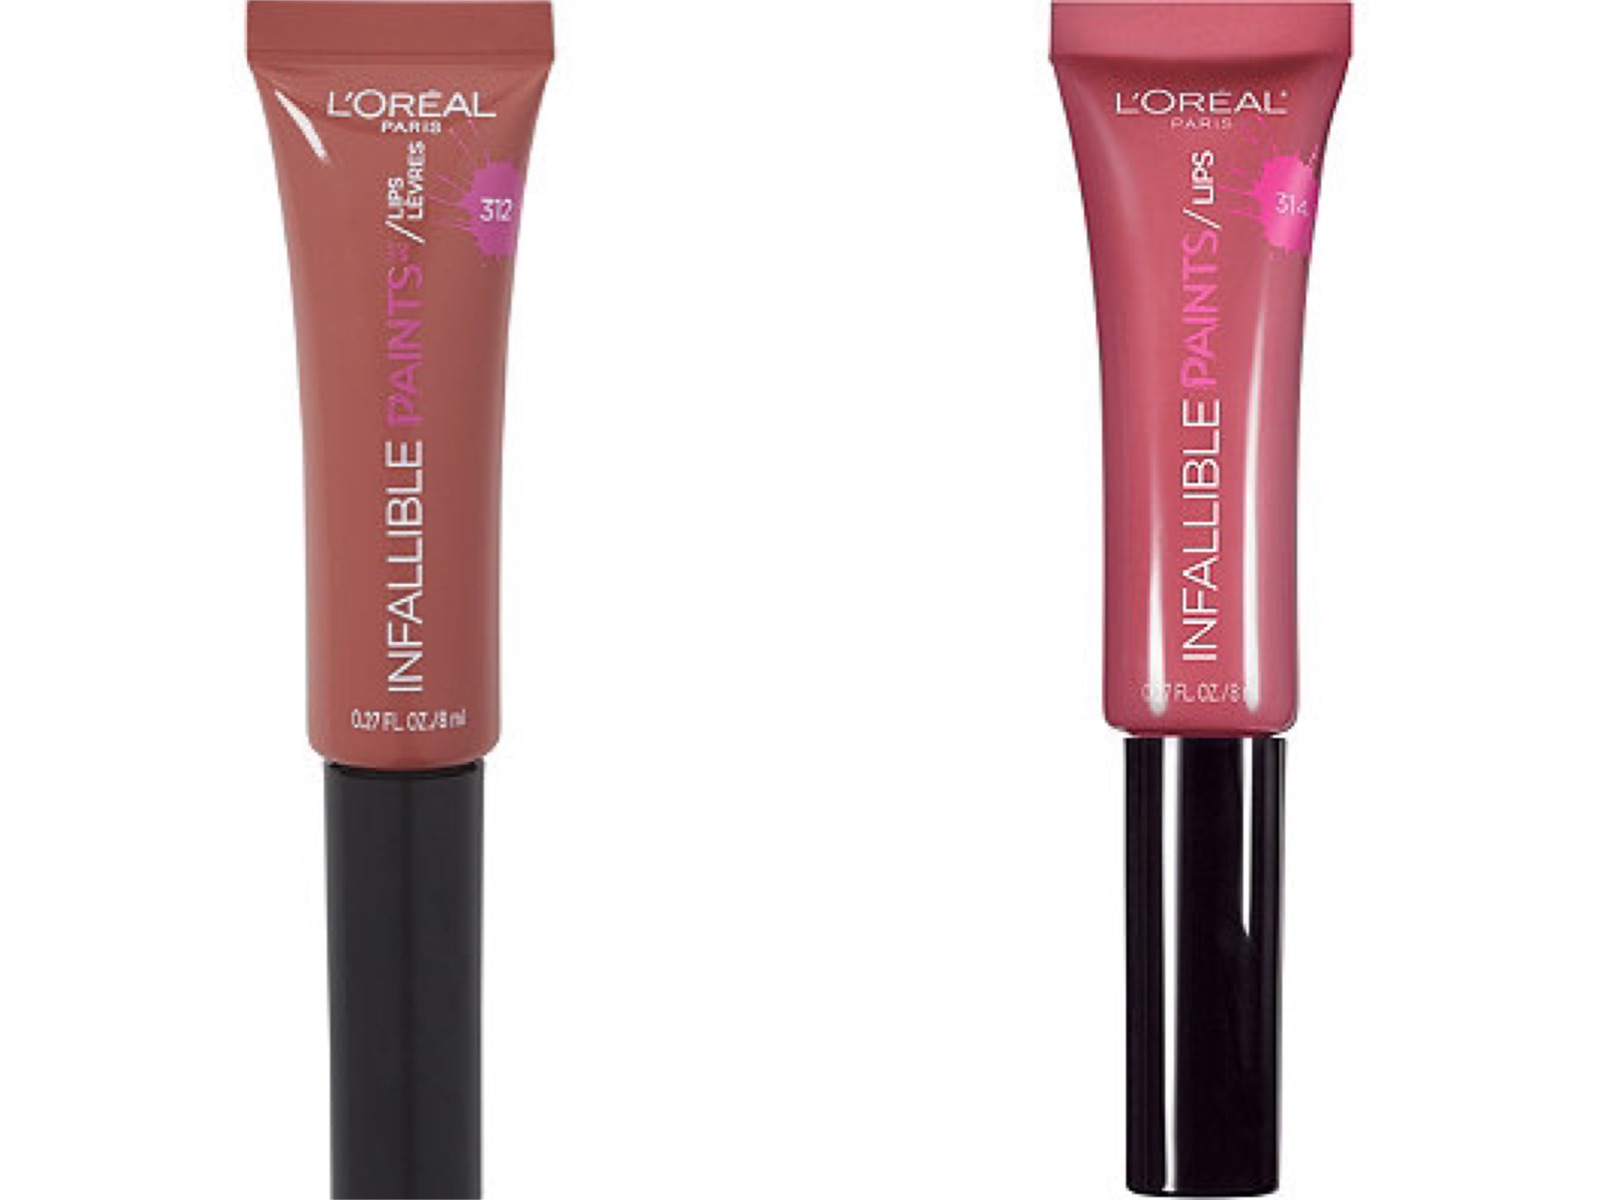 swatch l oreal infallible powder shades